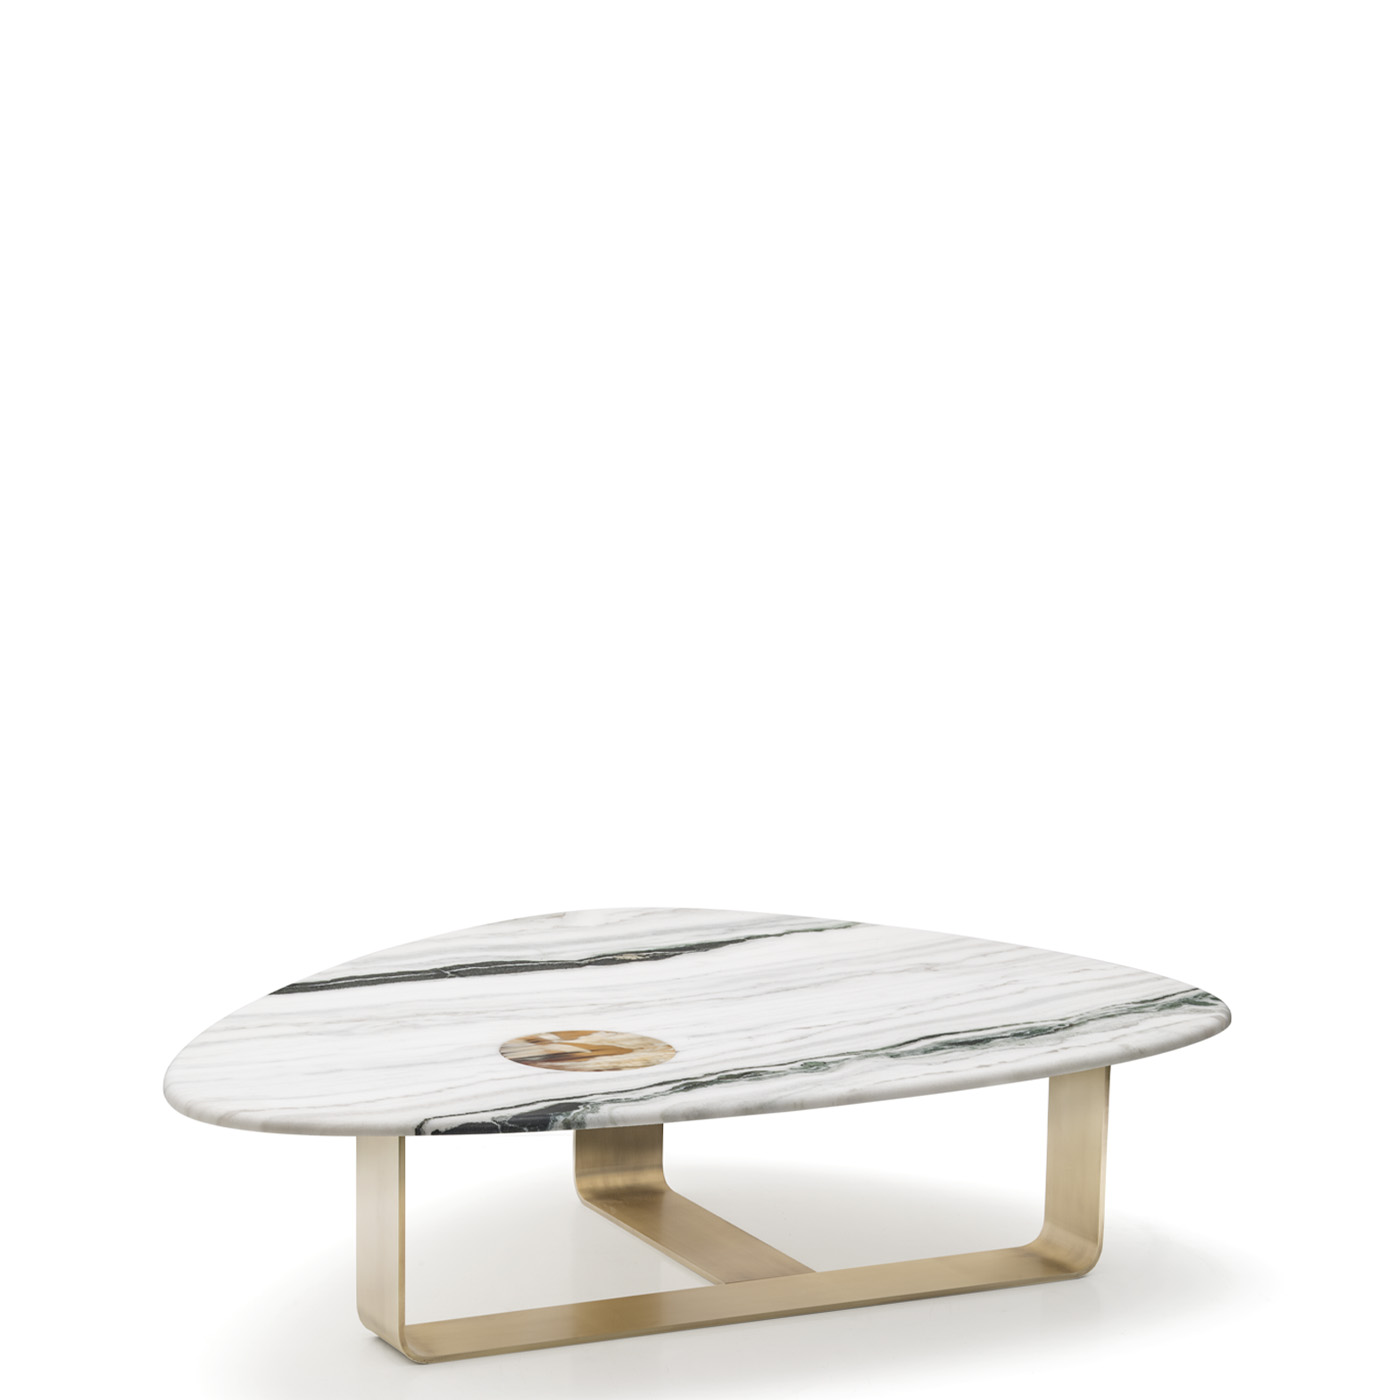 Tables and console tables - Demetra coffee table in Dalmata marble and horn - still life - Arcahorn (7)